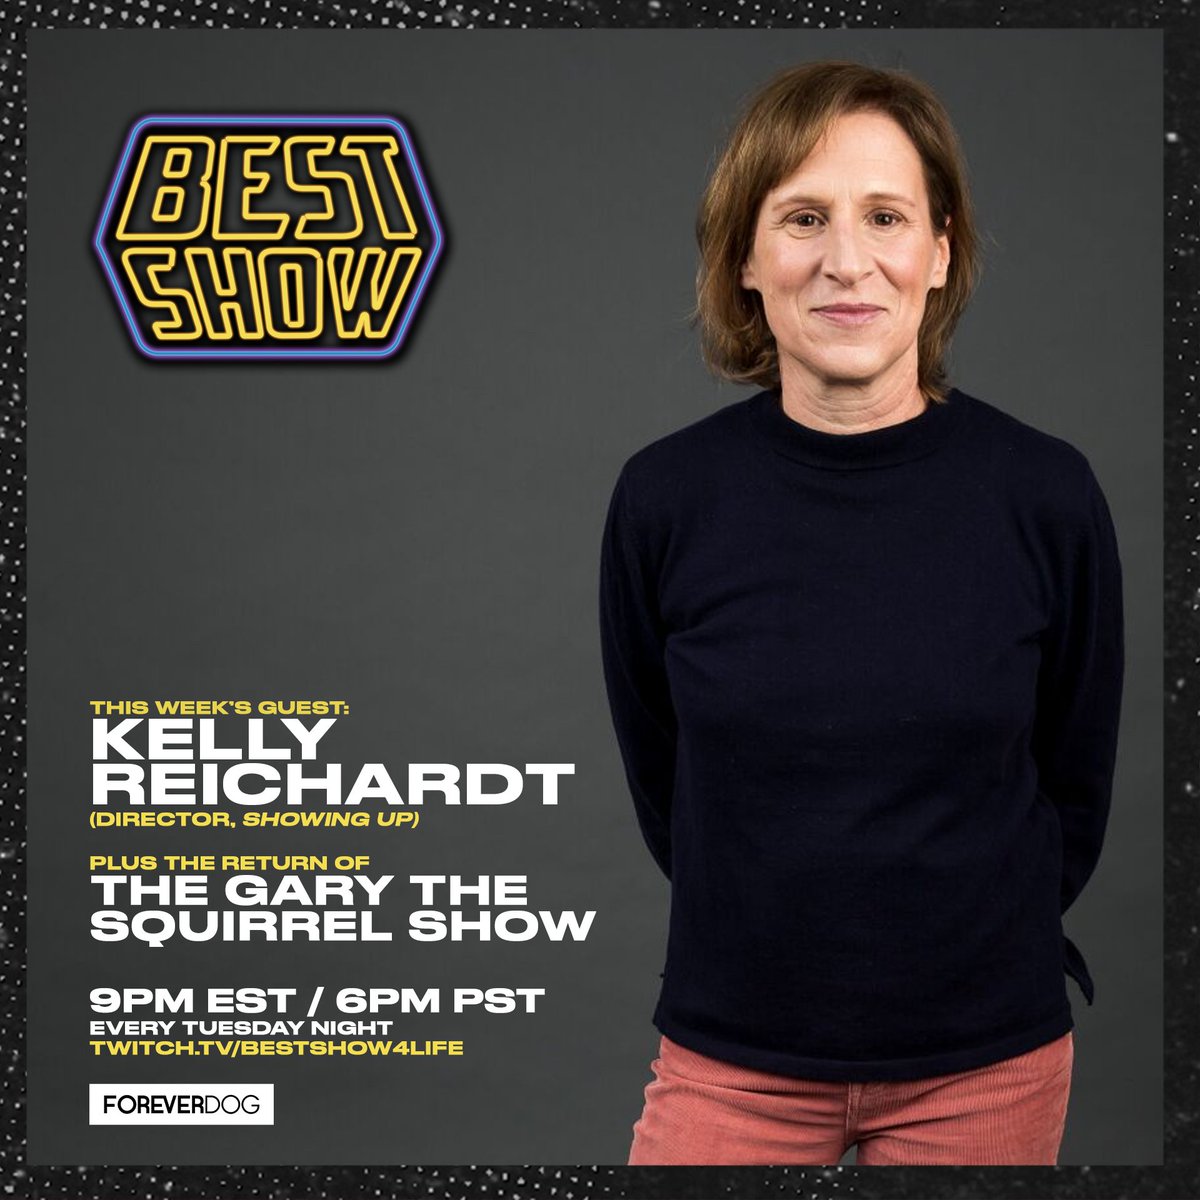 This Tuesday night, KELLY REICHARDT (director, #ShowingUp, #WendyAndLucy, @FirstCow, #CertainWomen) for an interview with @scharpling!

Plus, the return of THE GARY THE SQUIRREL SHOW with surprise guests!

Watch live on Twitch: linktr.ee/bestshow4life